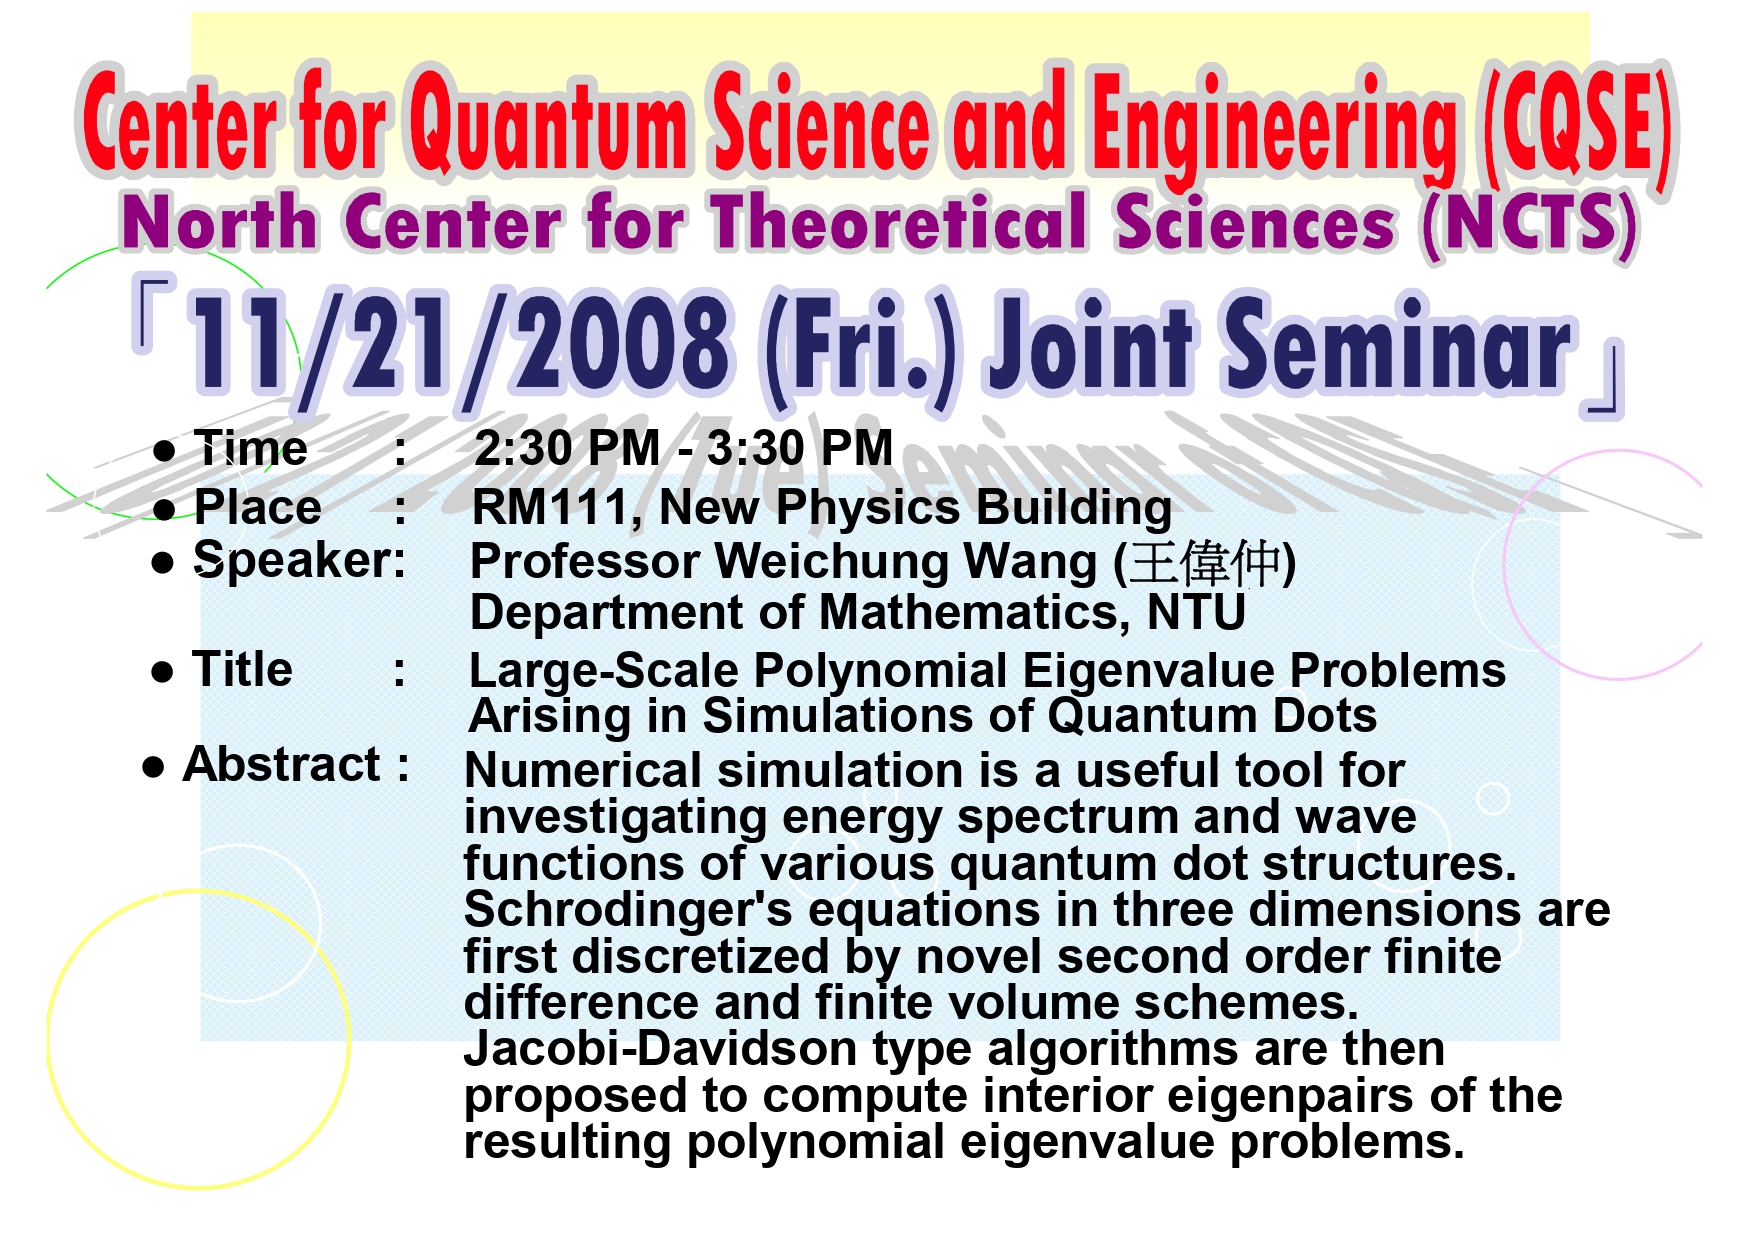 Joint Seminar of Center for Quantum Science and Engineering (CQSE) and National Center for Theoretical Sciences (North)